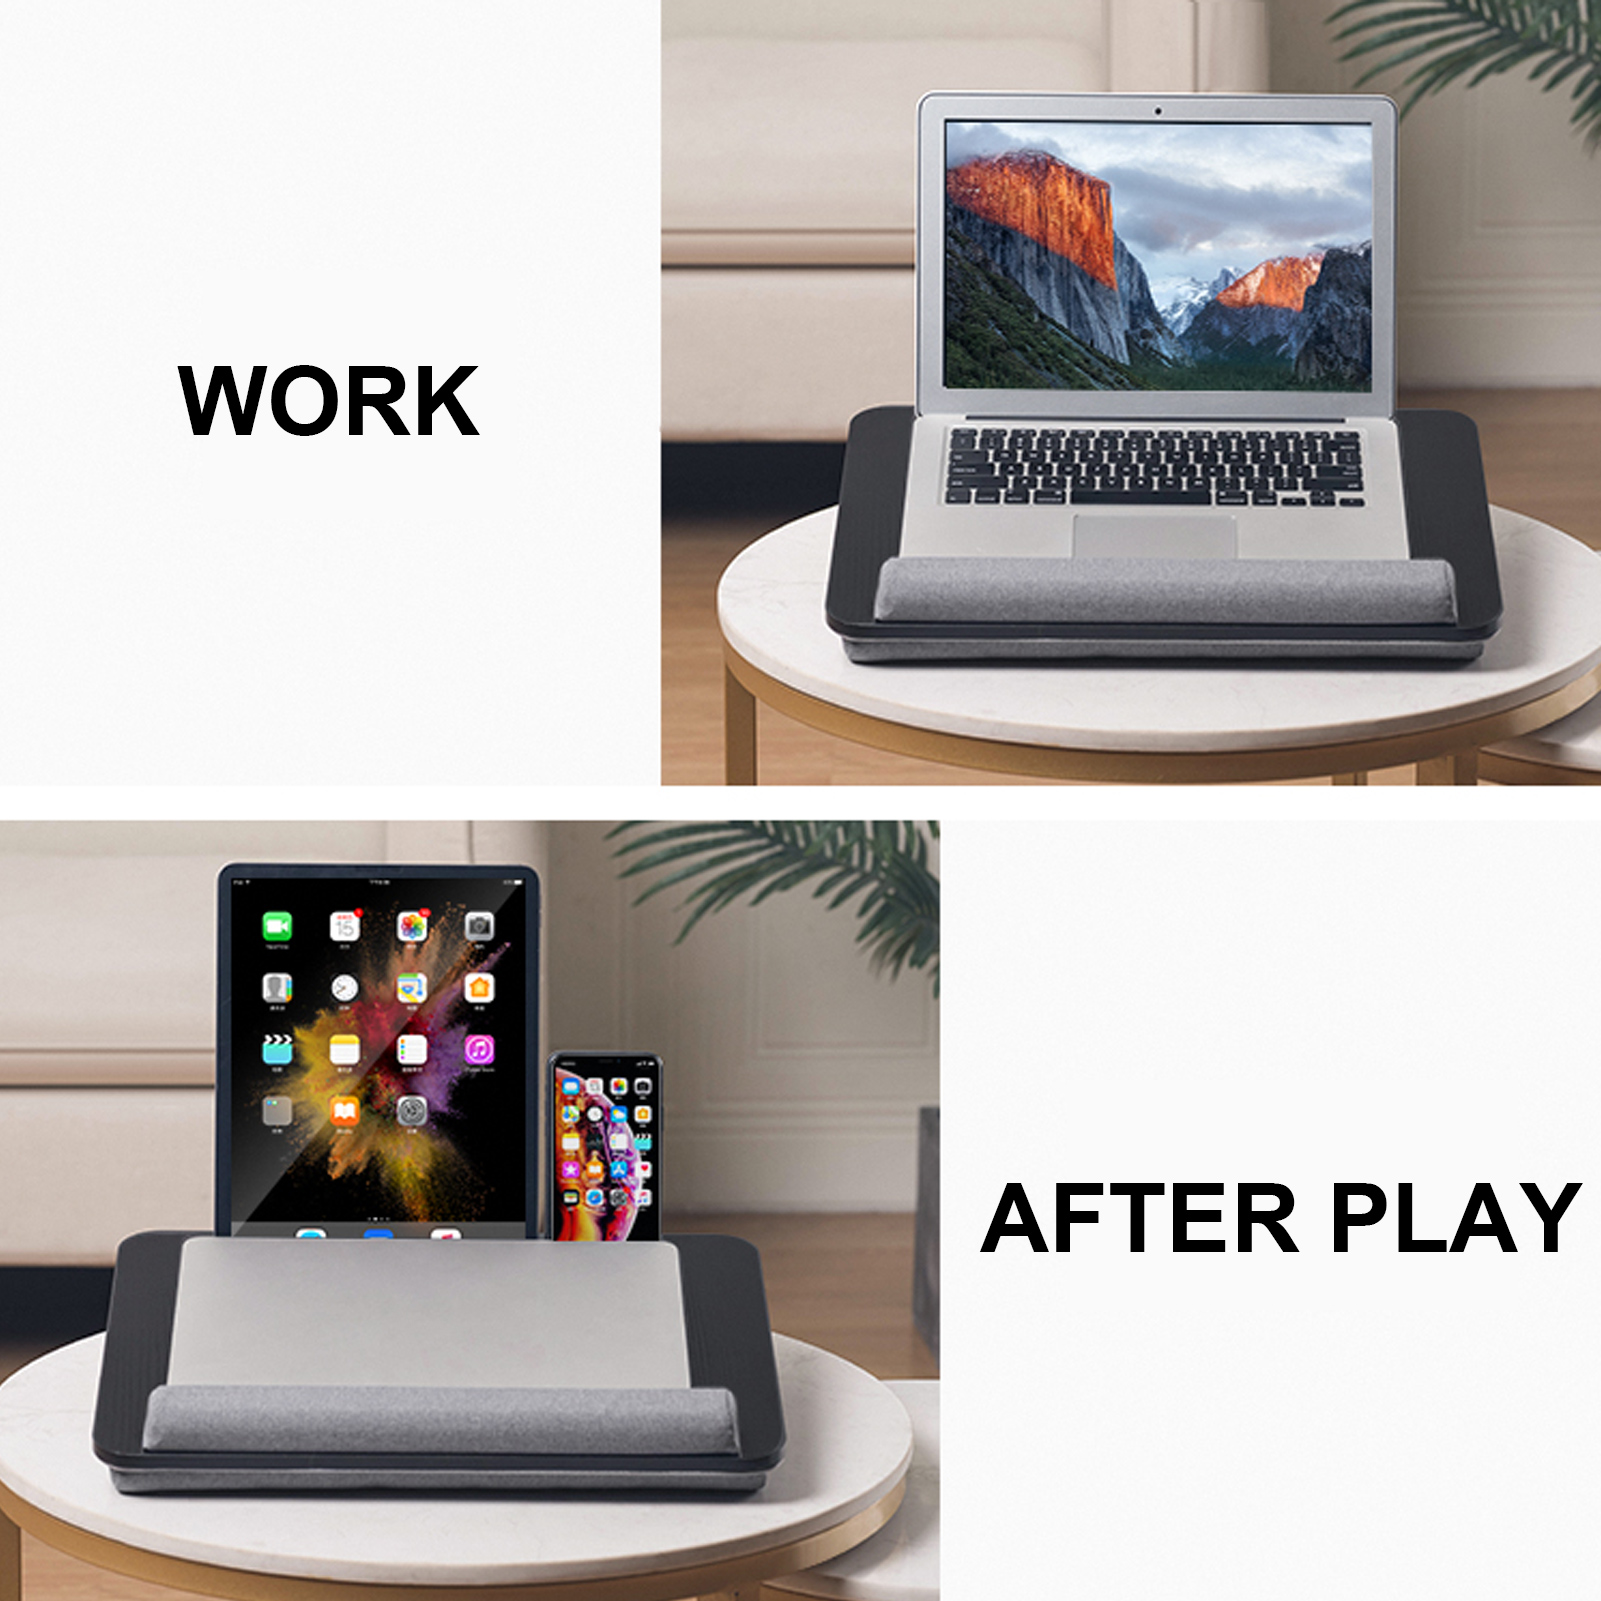 Memory Foam Laptop Stand Suitable for 14 Inch Laptop Portable Laptop Desks for Bed Sofa Home Working Office Lap Desk with Cable Hole & Anti-Slip Strip Soft Pillow Cushion Bamboo Platform 